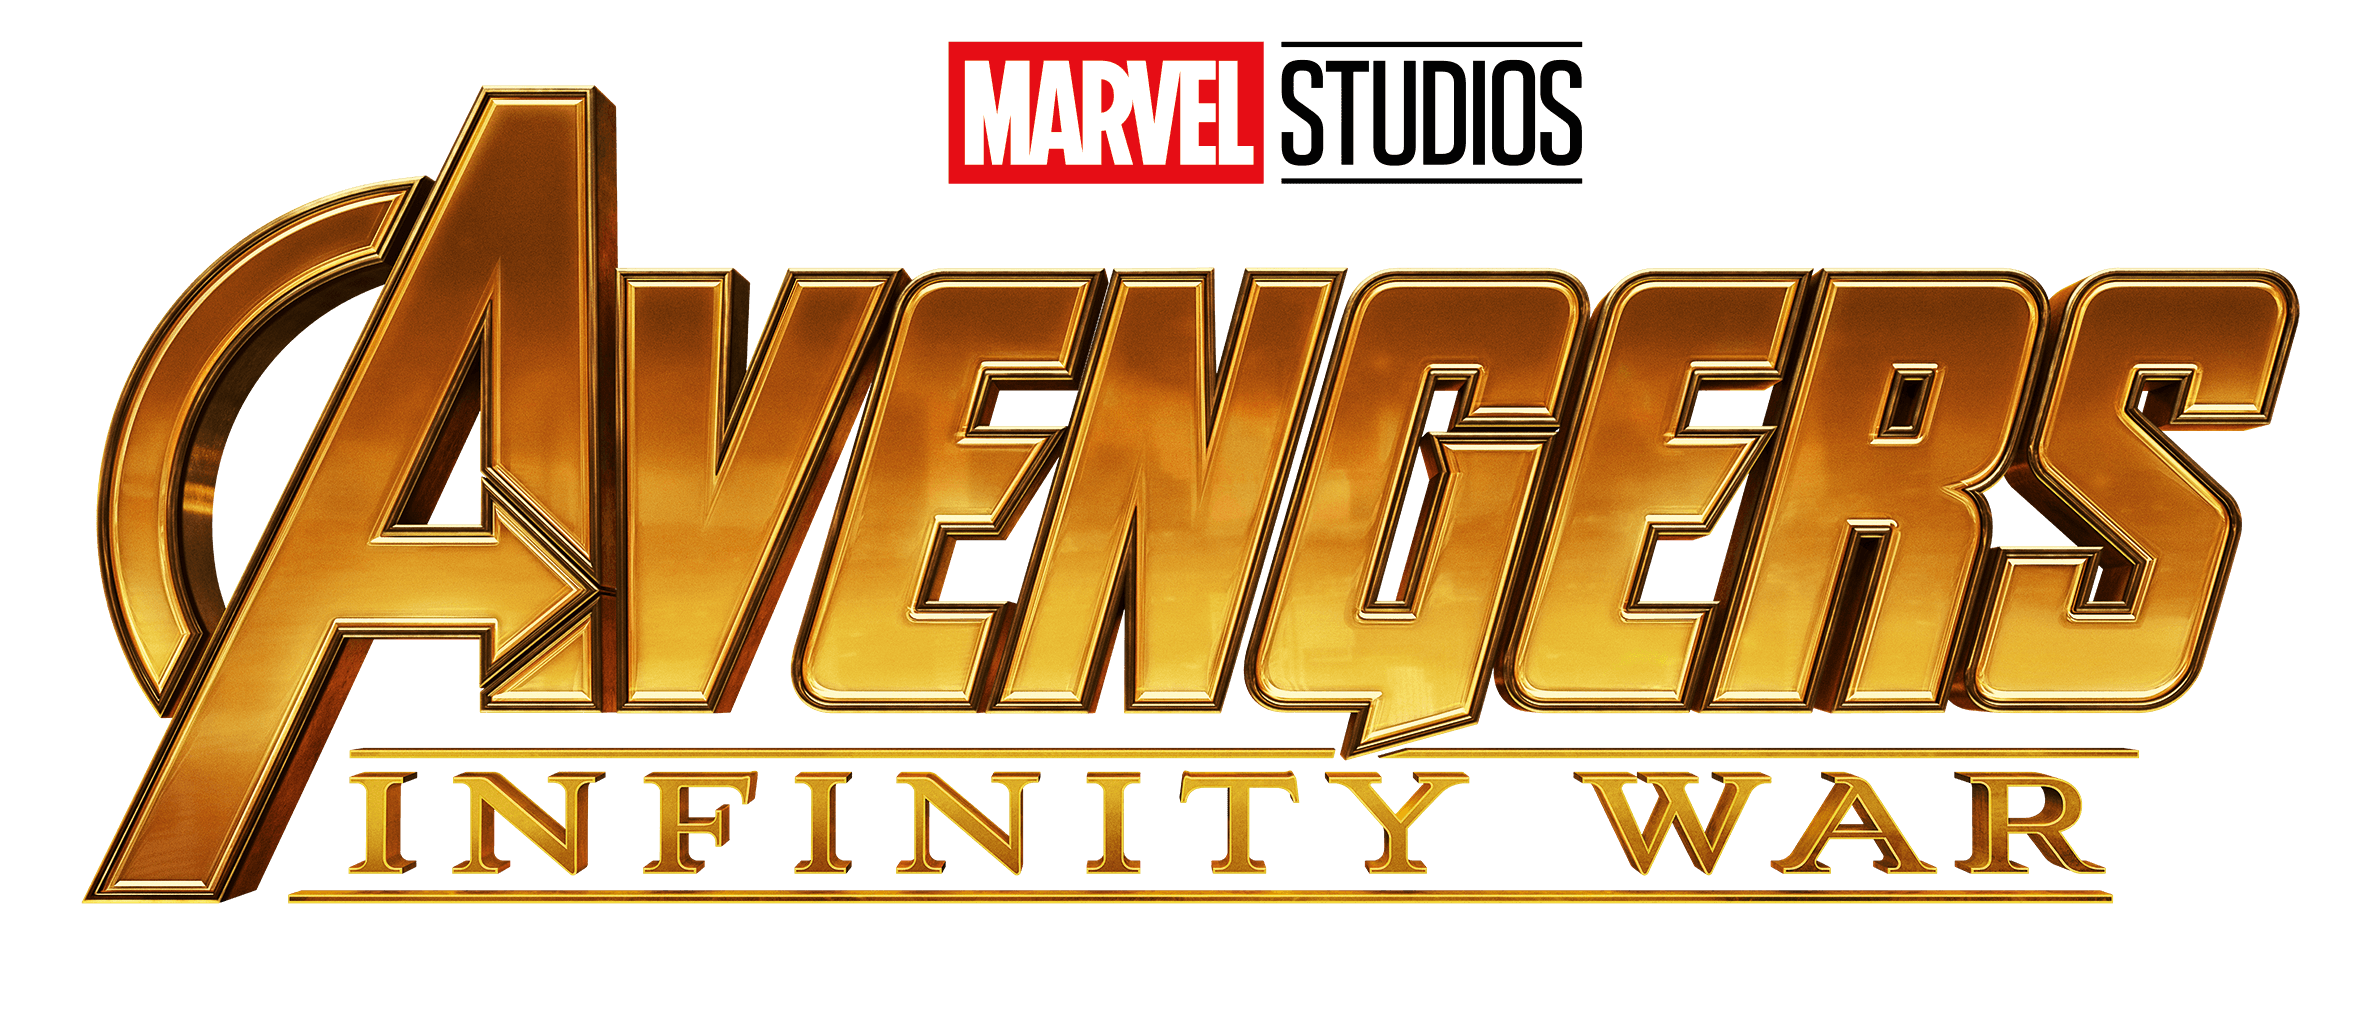 Avengers Infinity War Logo - Right now, I got access to the new official Infinity War Logo! Just ...